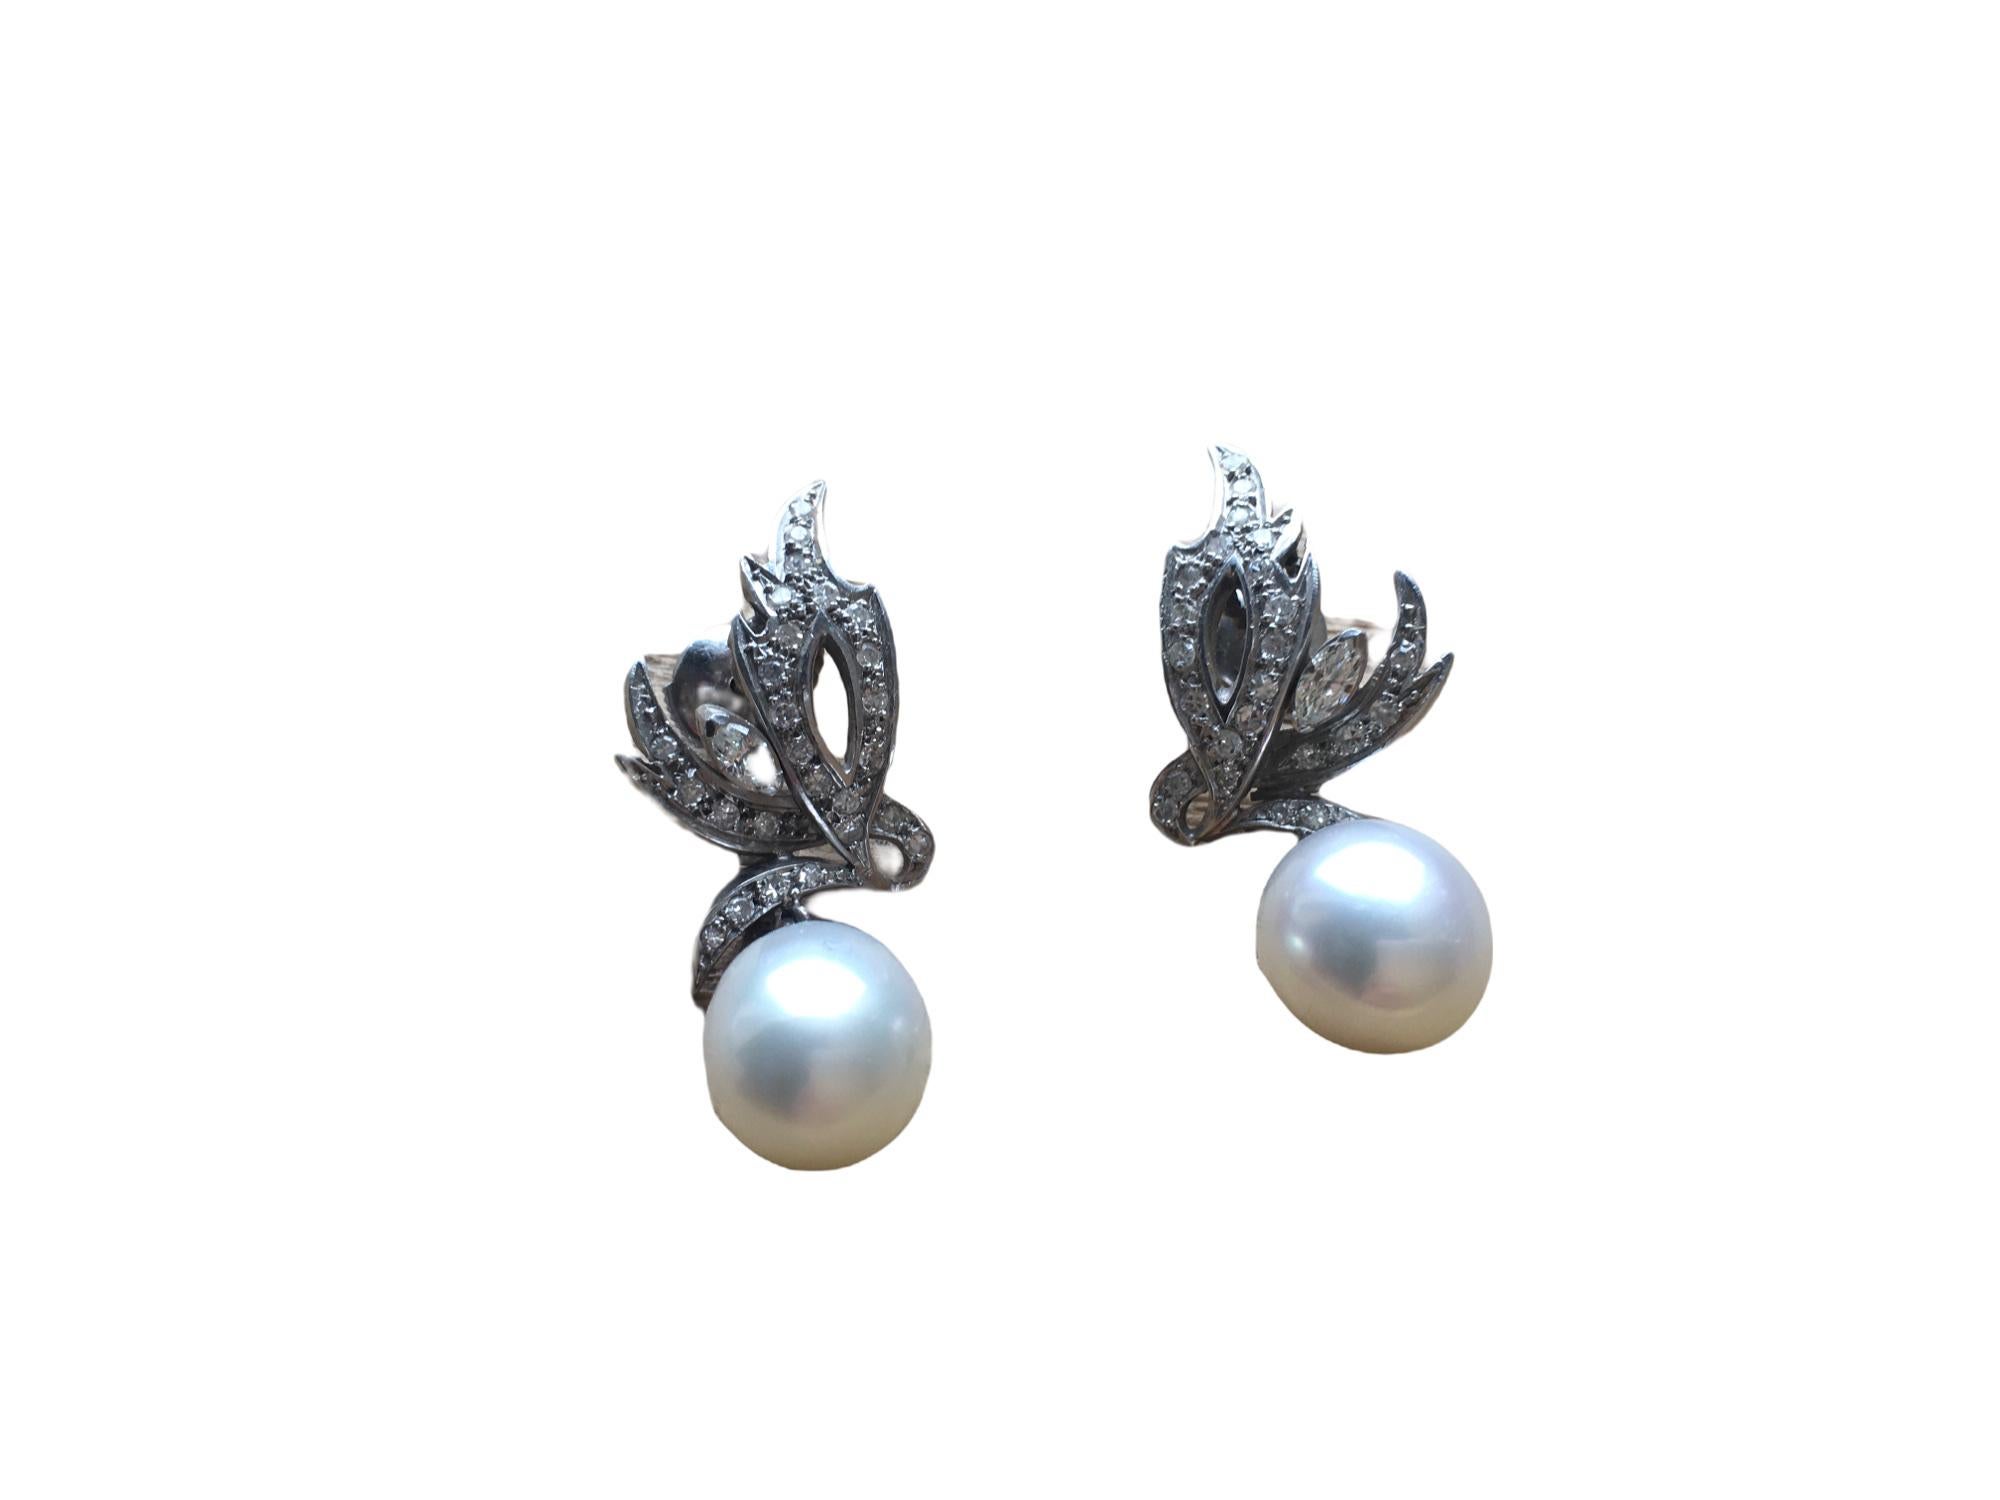 18 carat white gold Akoya cultured pearl diamond drop earrings 
With GIA certificate dated8 September 2017
Estimated total diamond weight 1.1 carat
Weight 12 grams
In very good condition 
No missing stones. 